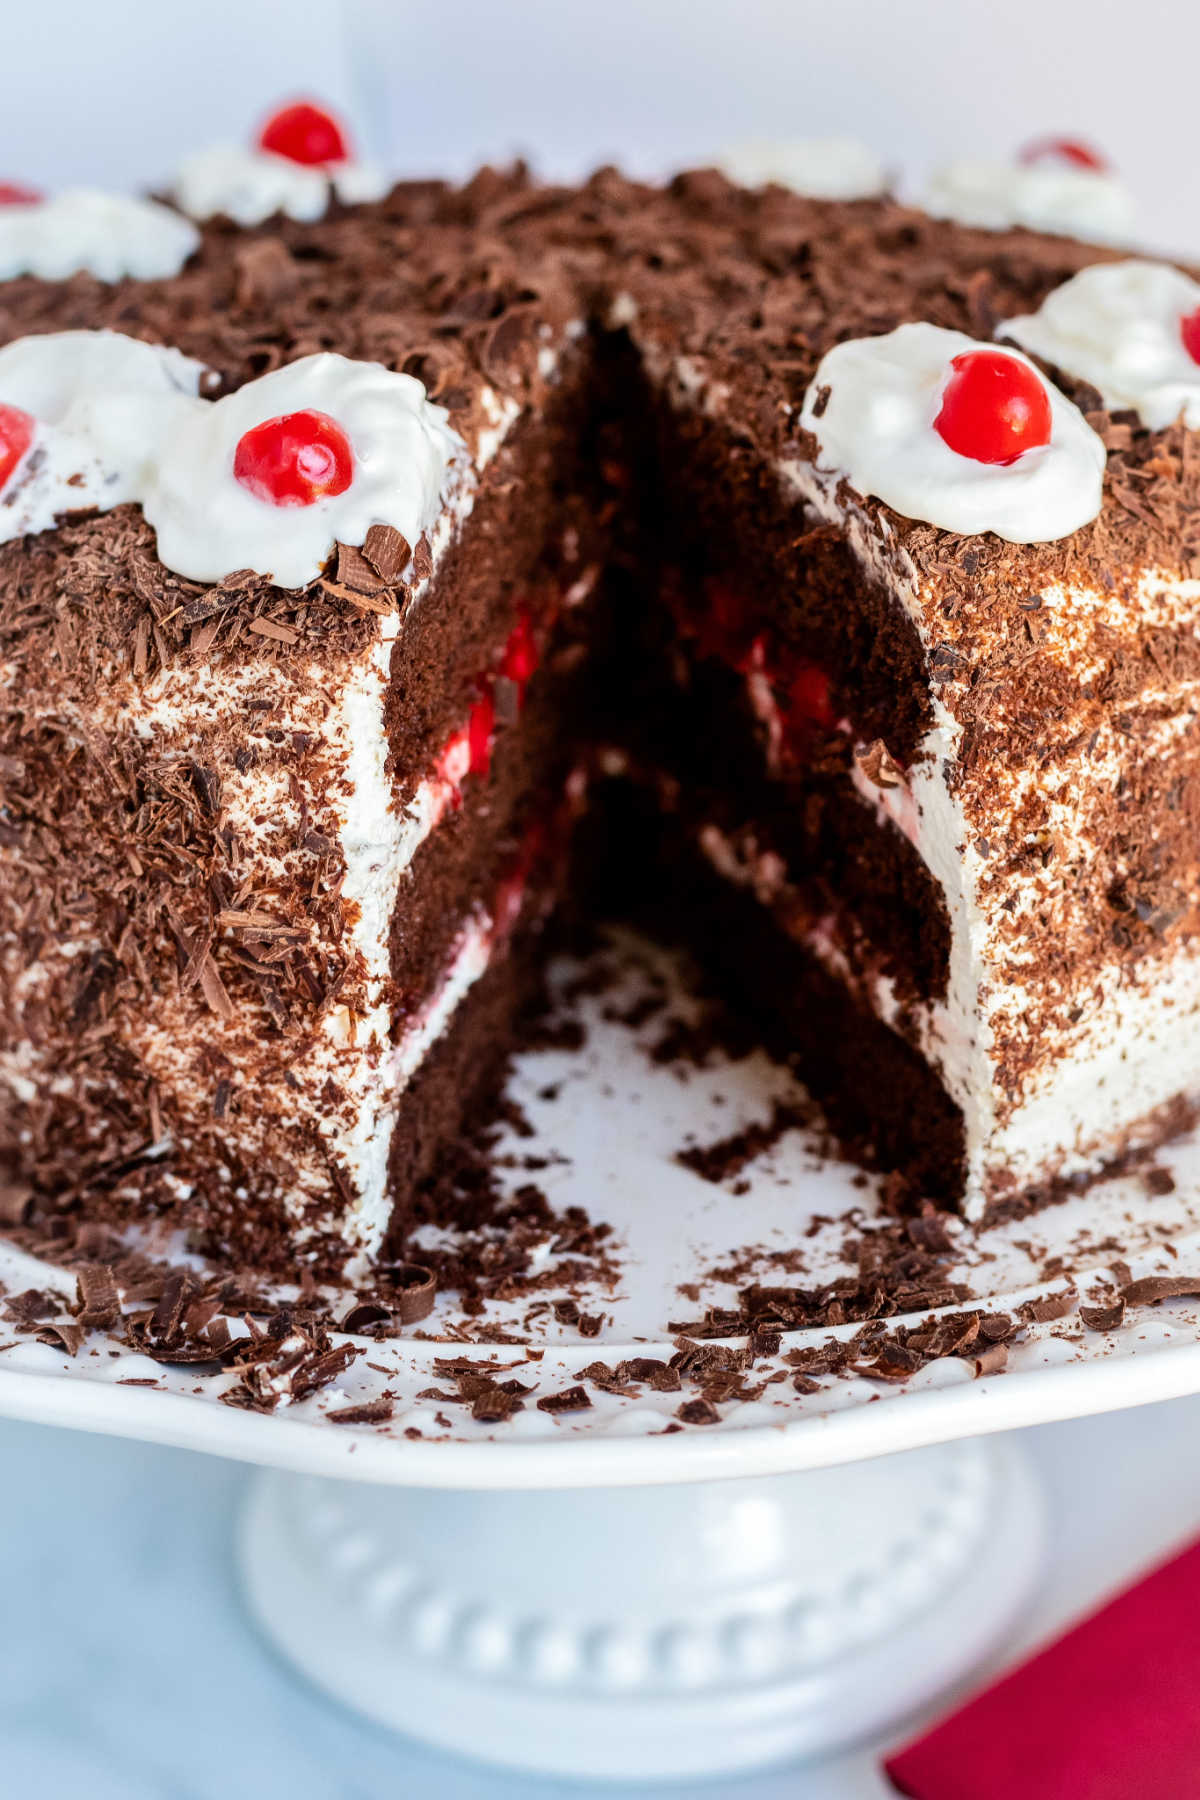 A picture of the black forest chocolate cake with a slice taken out of it.